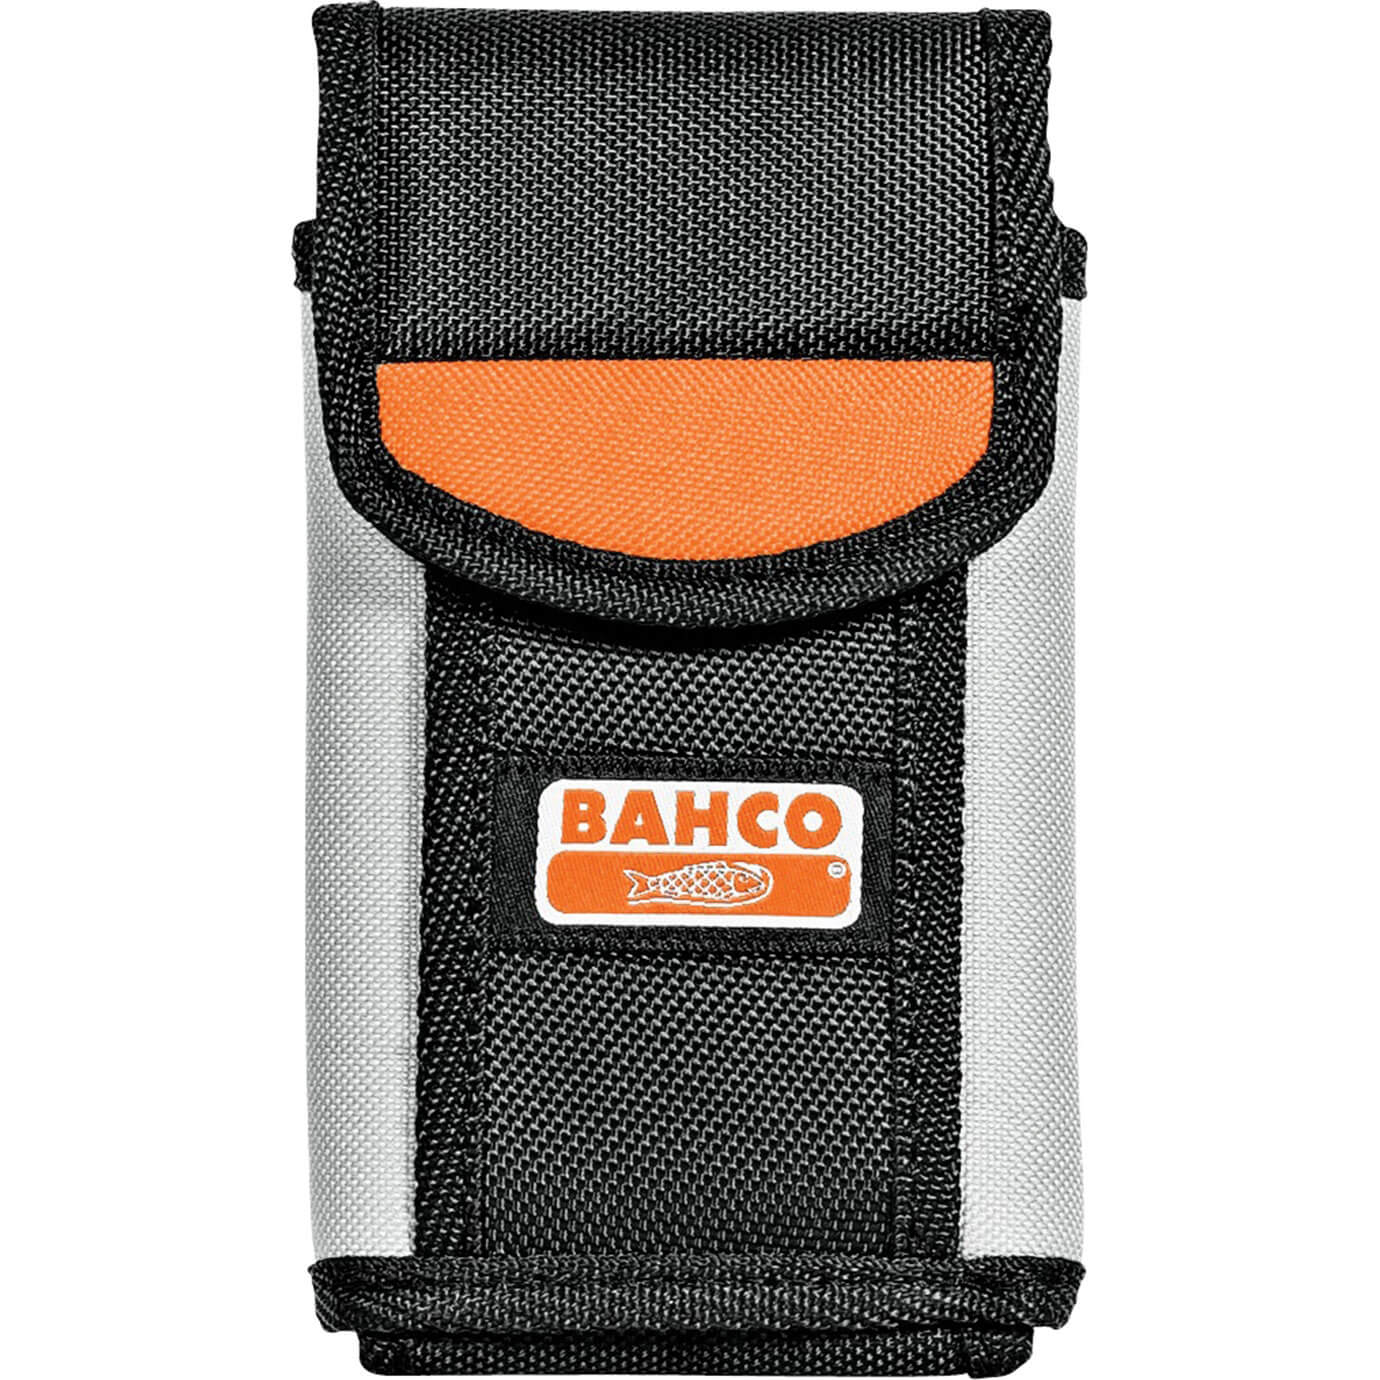 Image of Bahco Mobile Phone Holder